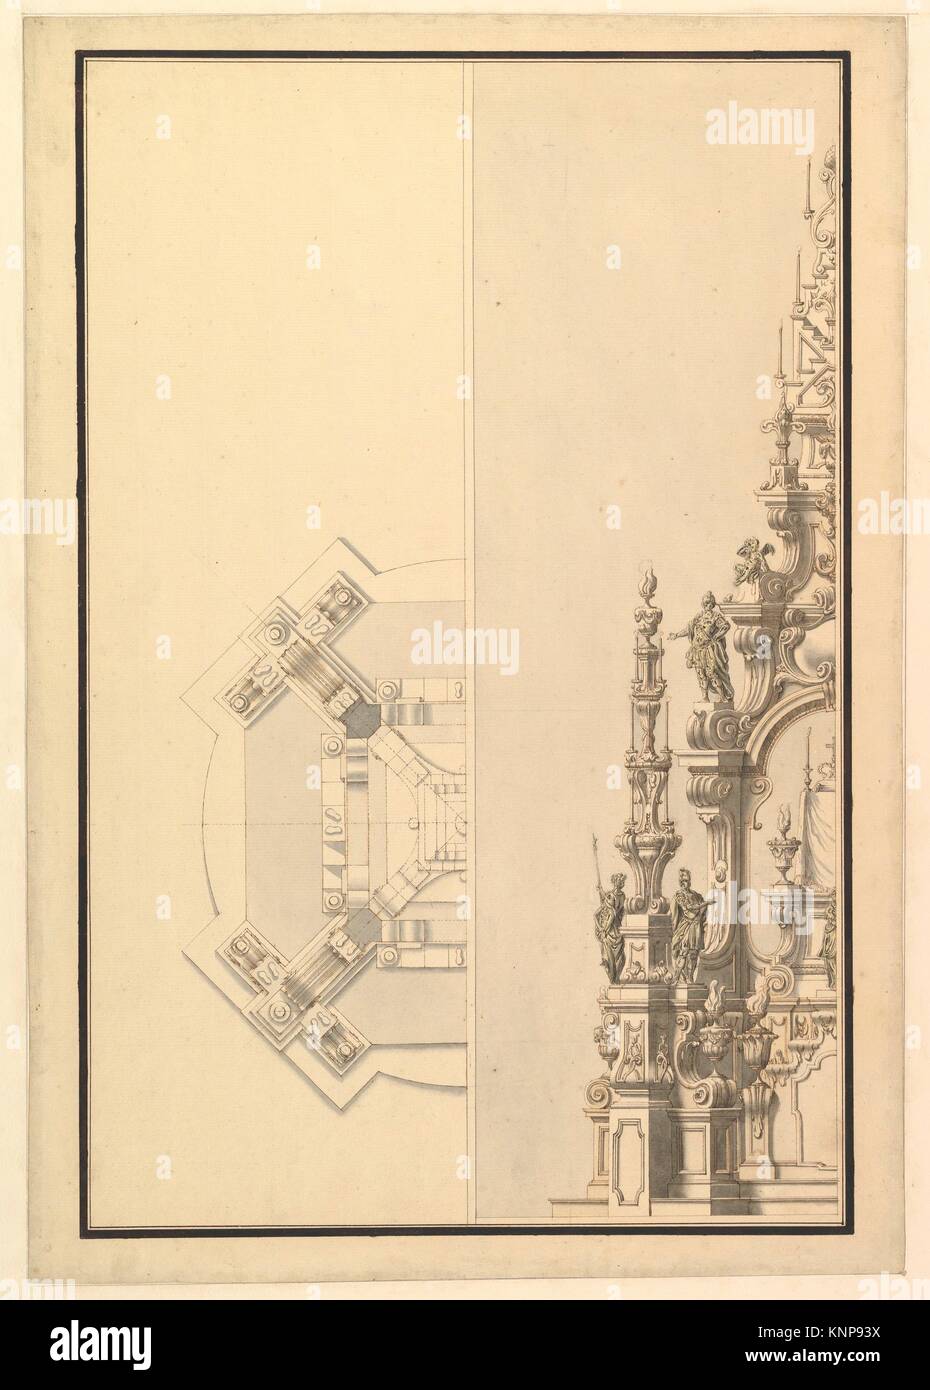 Half Plan and Half Elevation for a Catafalque with Royal Crown Surmounting the Casket. Artist: Workshop of Giuseppe Galli Bibiena (Italian, Parma Stock Photo